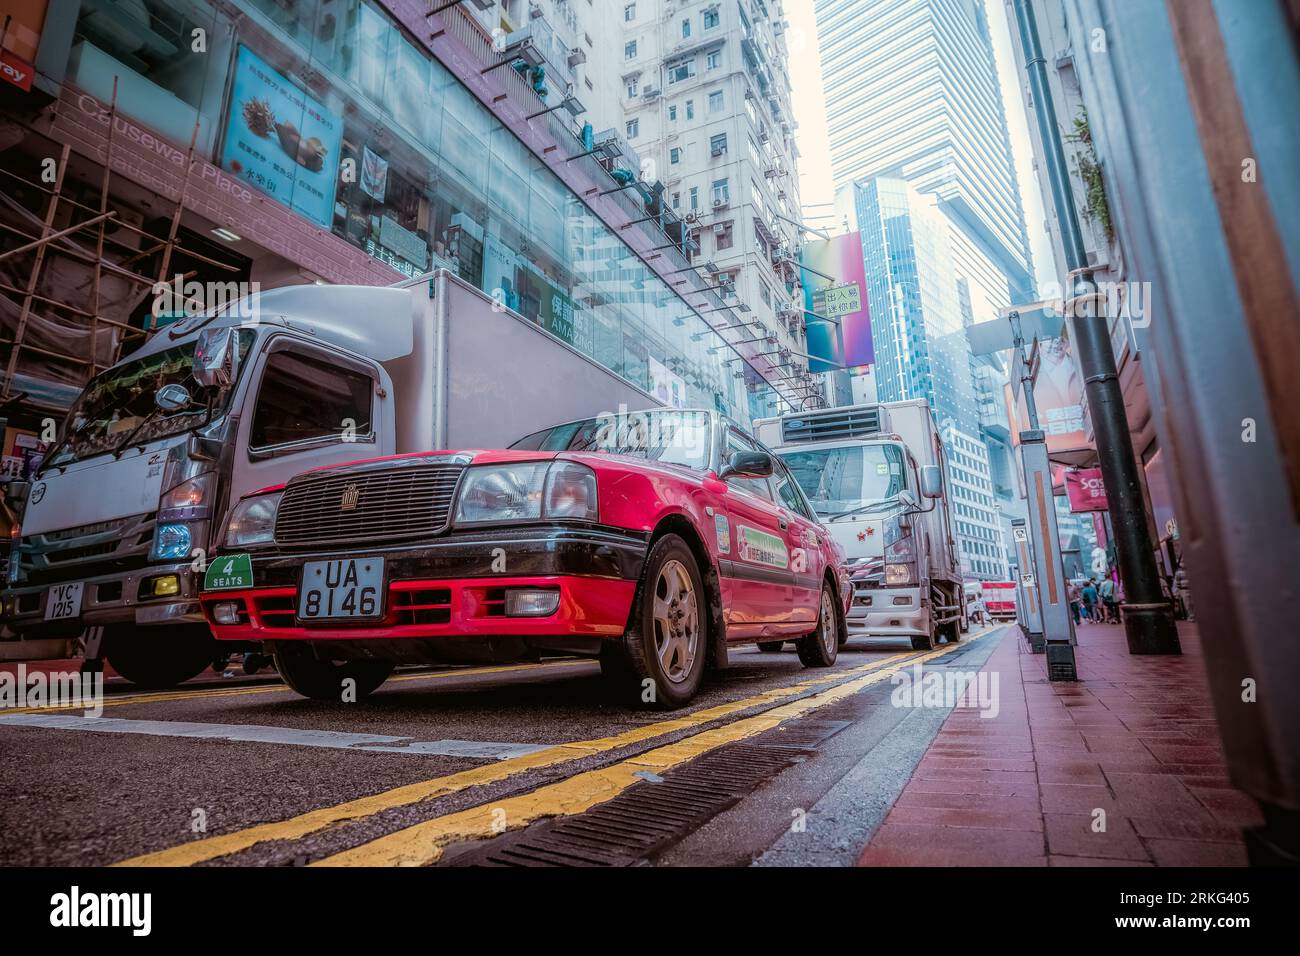 A red taxi at a traffic light in Hong Kong. Low angle view Stock Photo